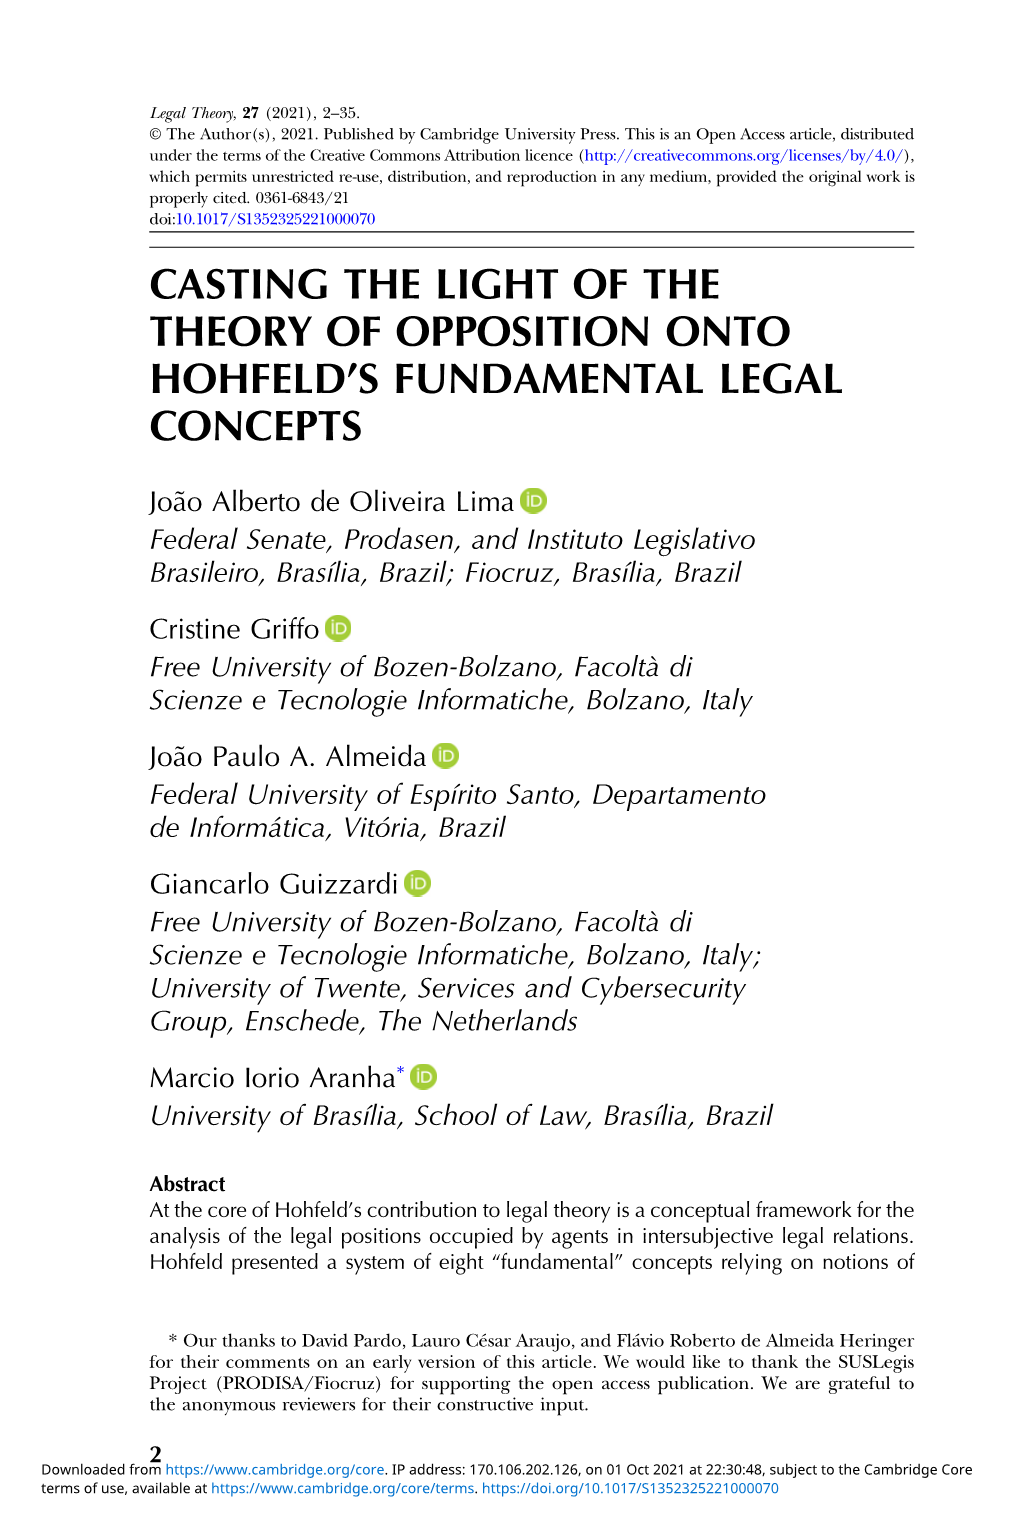 Casting the Light of the Theory of Opposition Onto Hohfeld’S Fundamental Legal Concepts